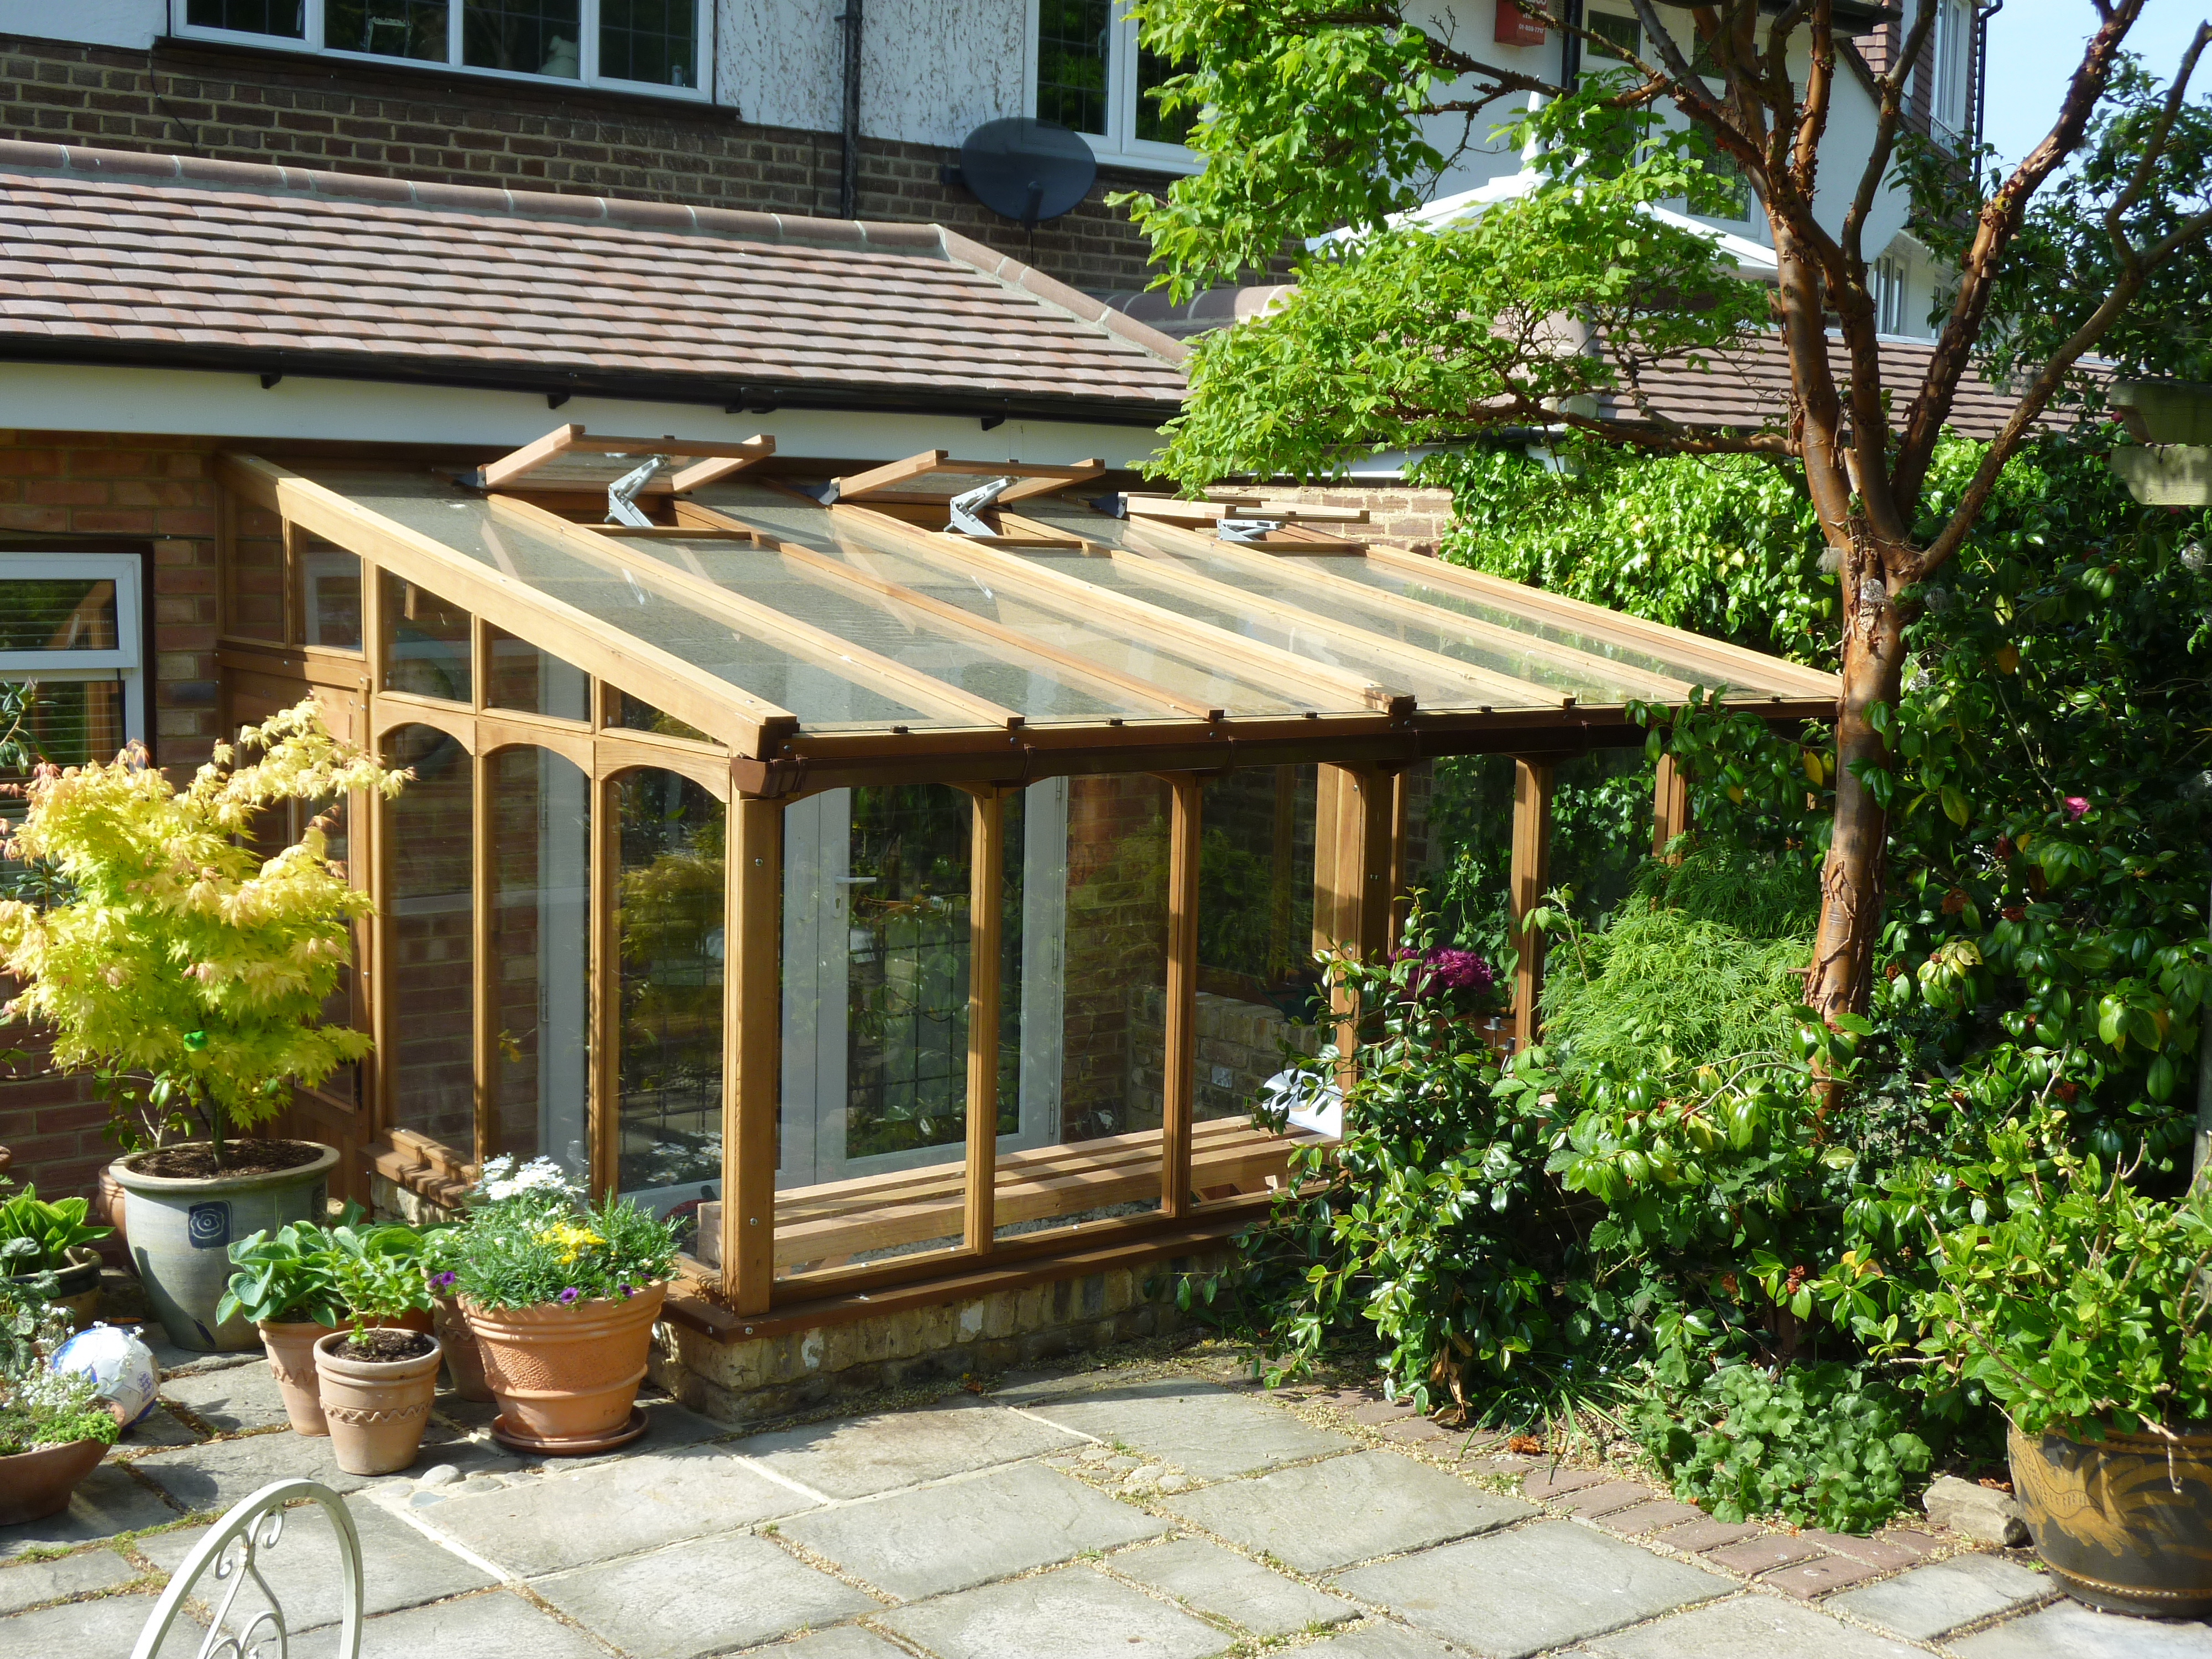 Cedar greenhouse with arched window